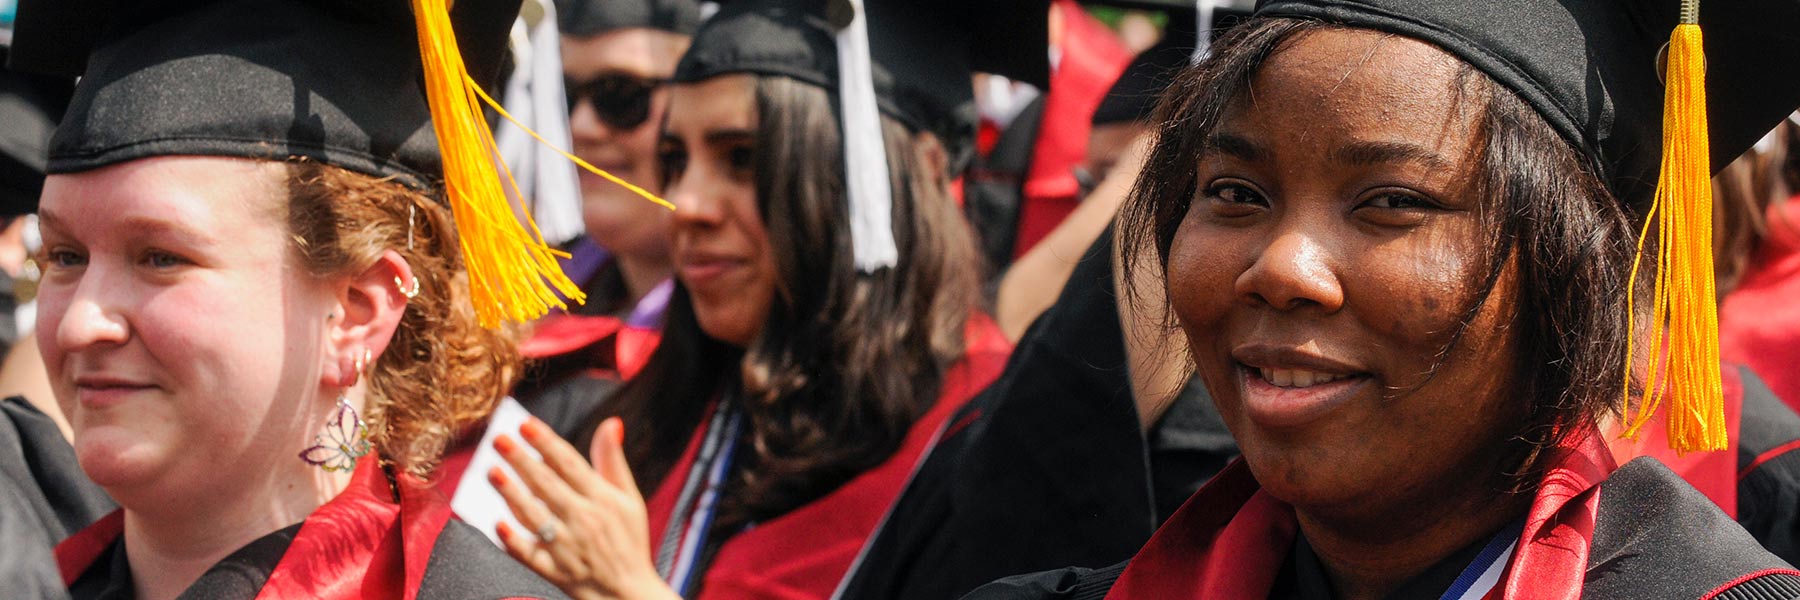 A woman in graduation attire smiles for the camera amongst a crowd